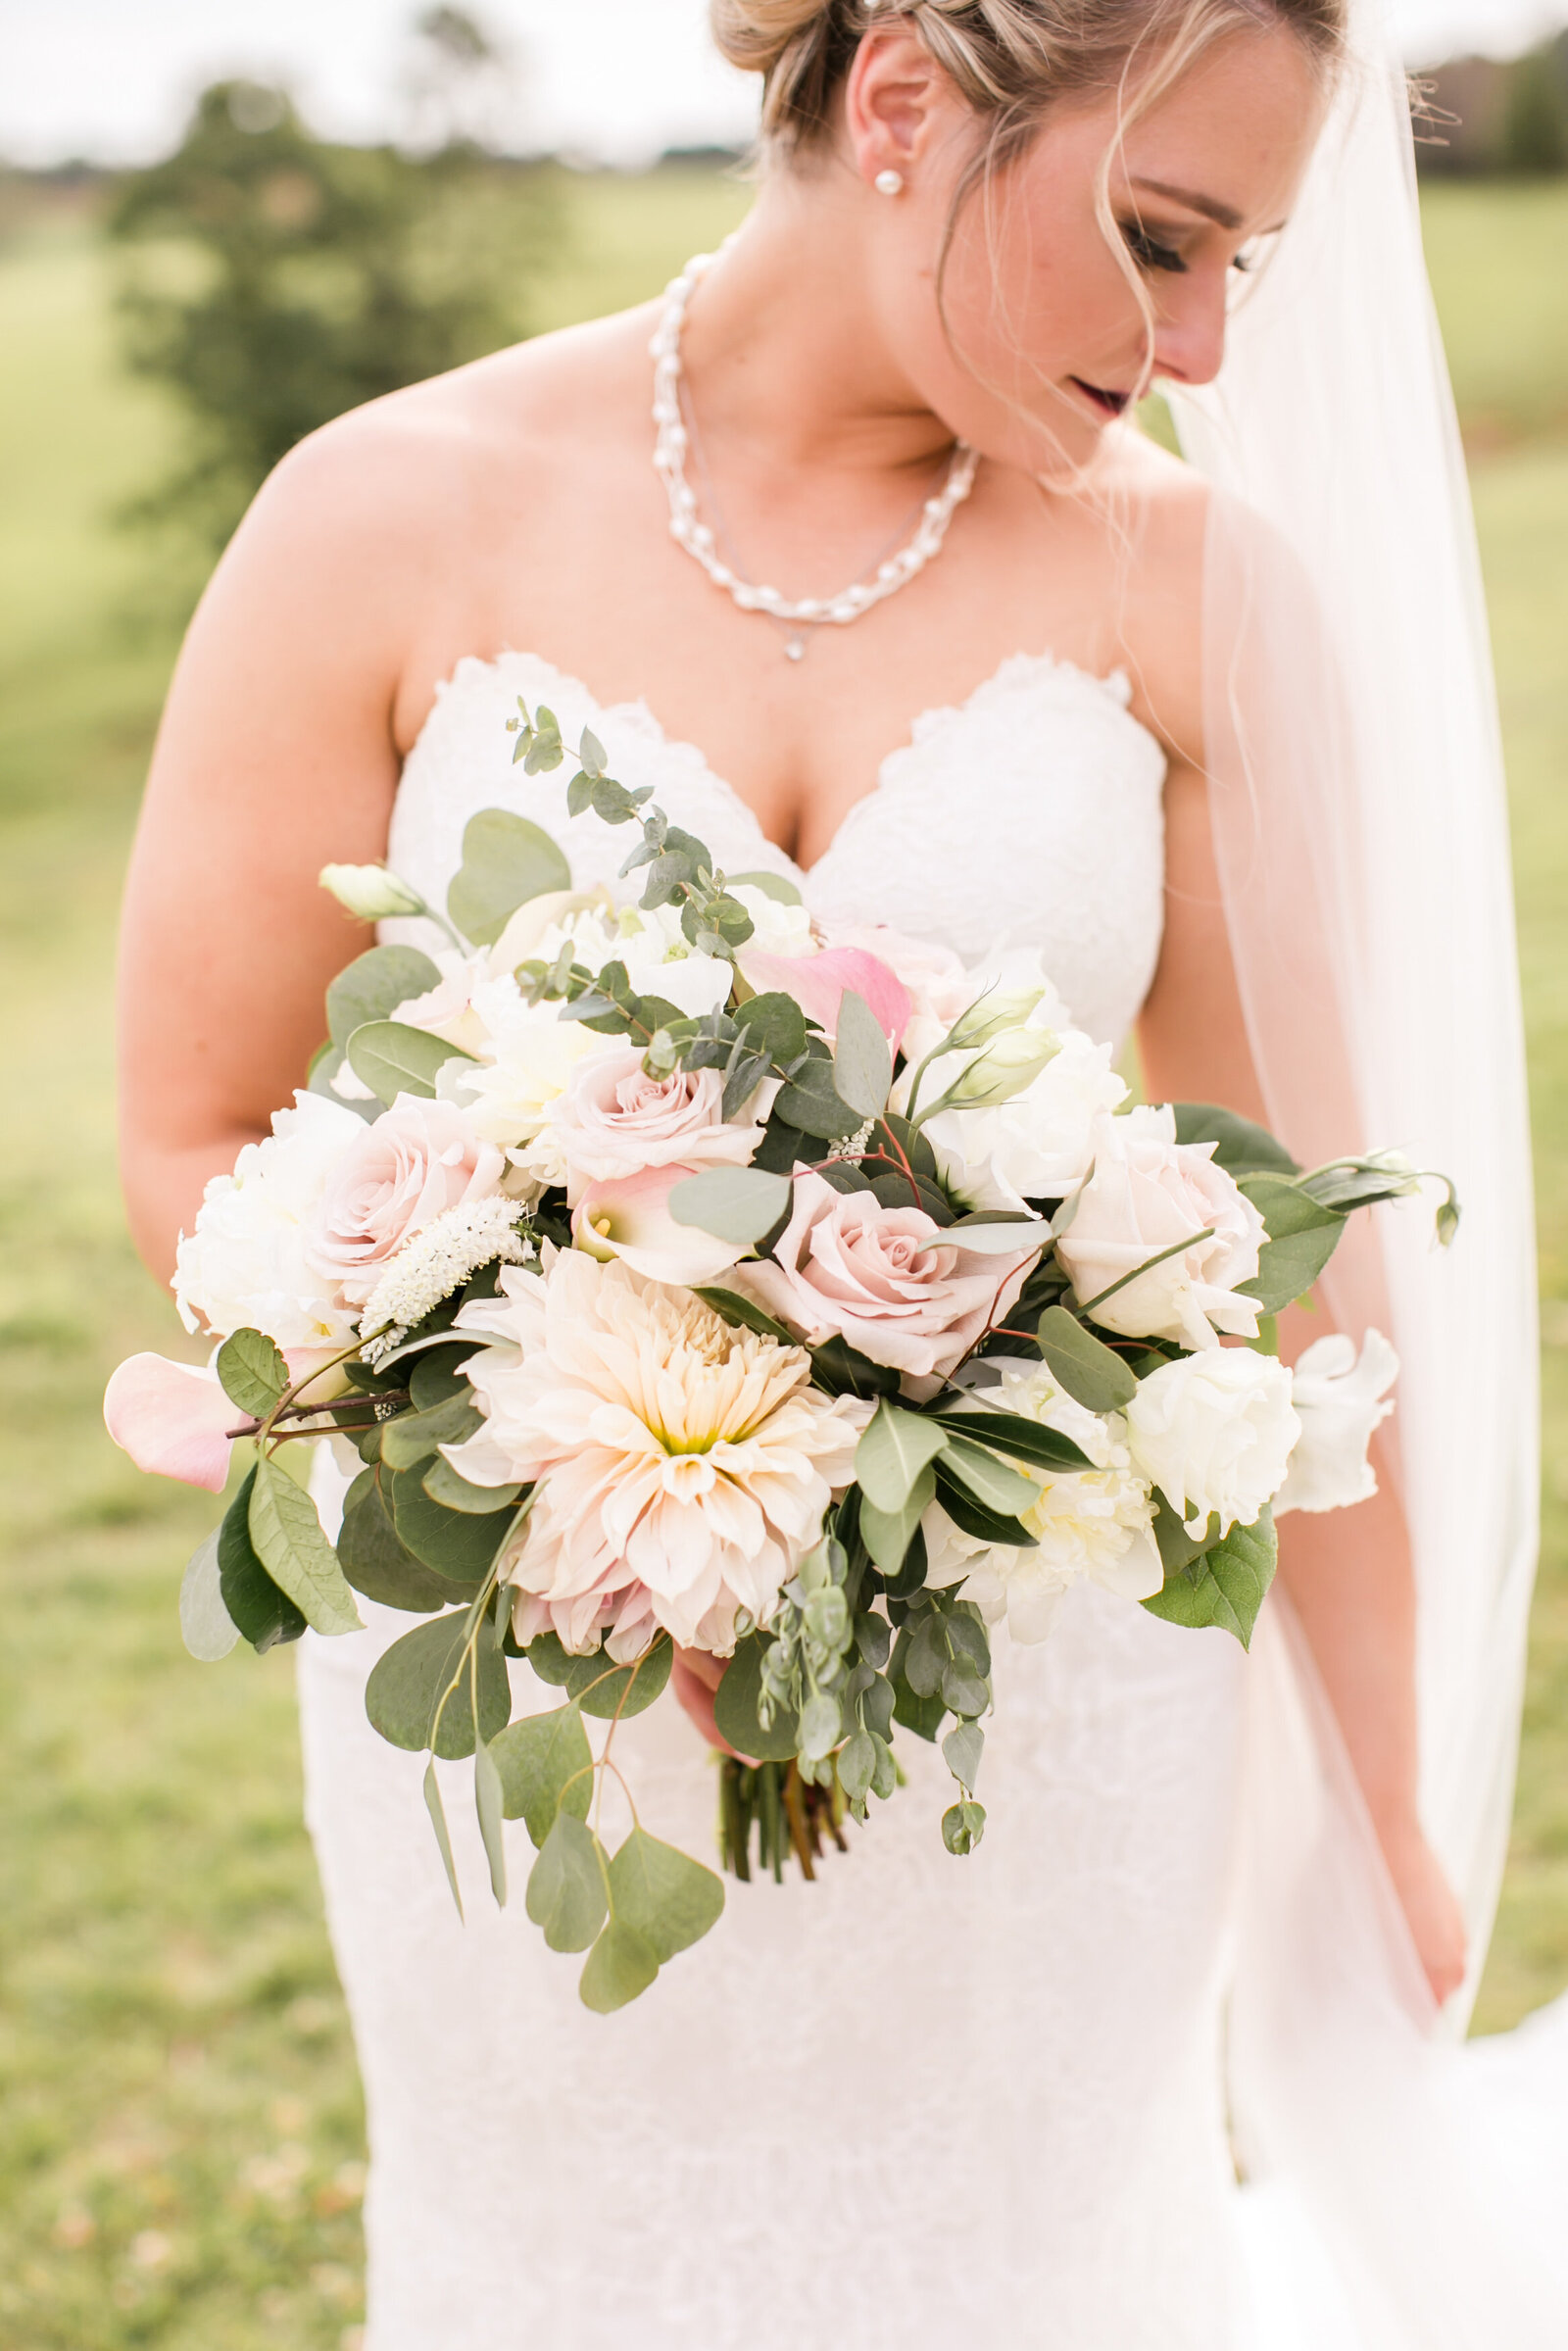 Stone_Tower_Winery_Wedding_Photographer_Maguire458